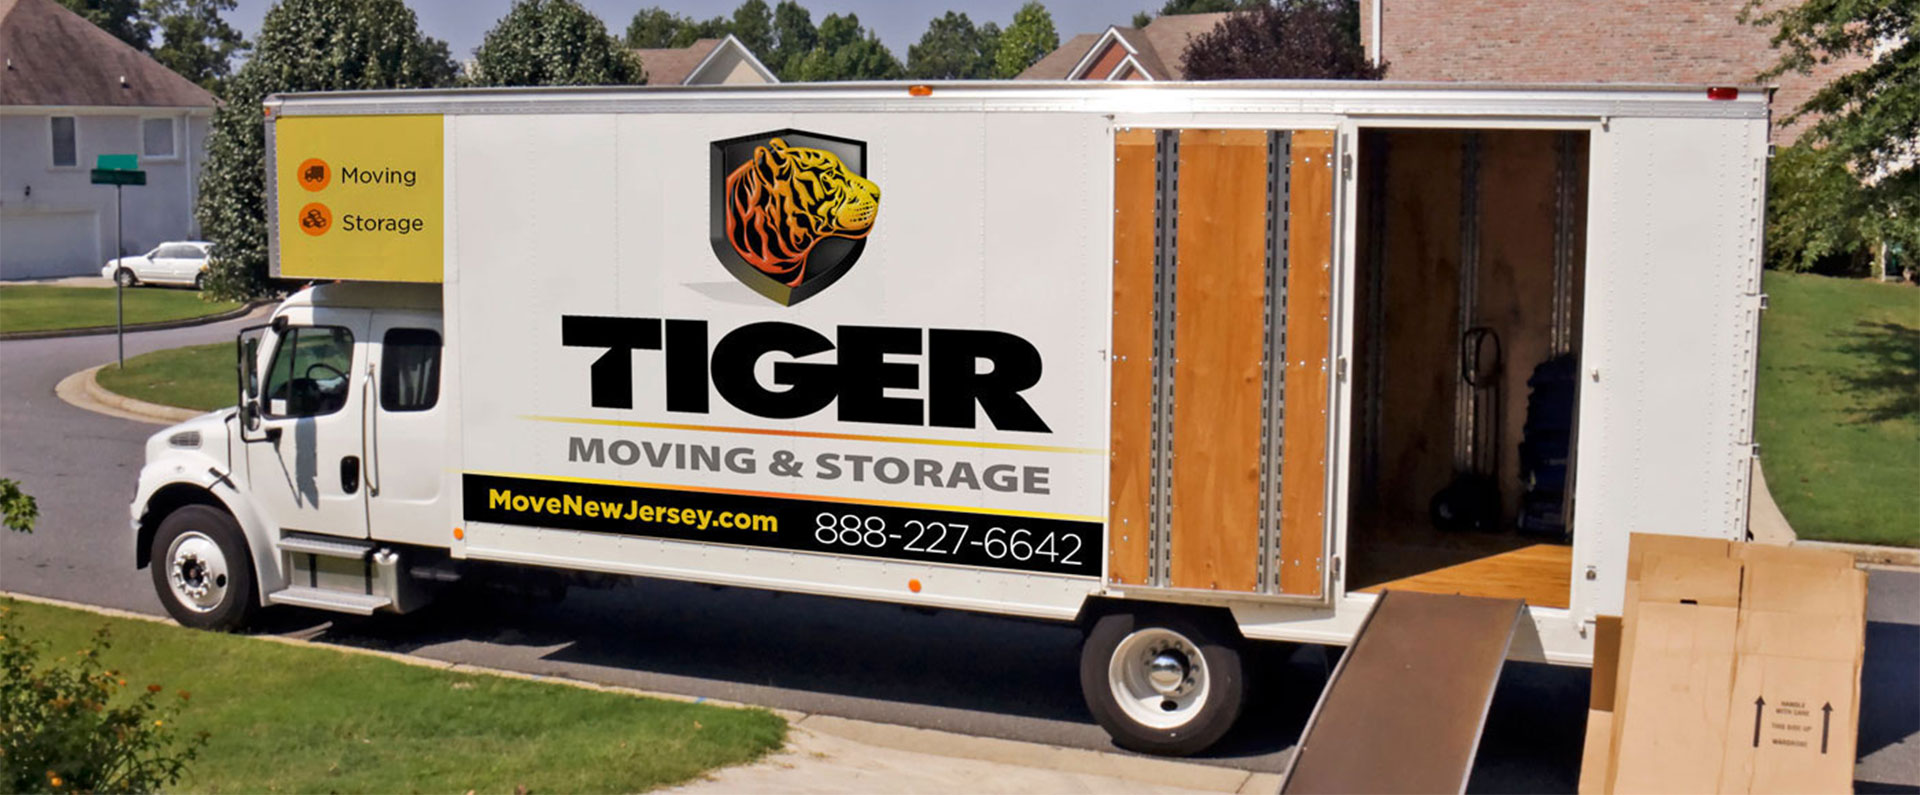 On Site Nj Moving Storage Vs Portable Which Is Better For Your Move